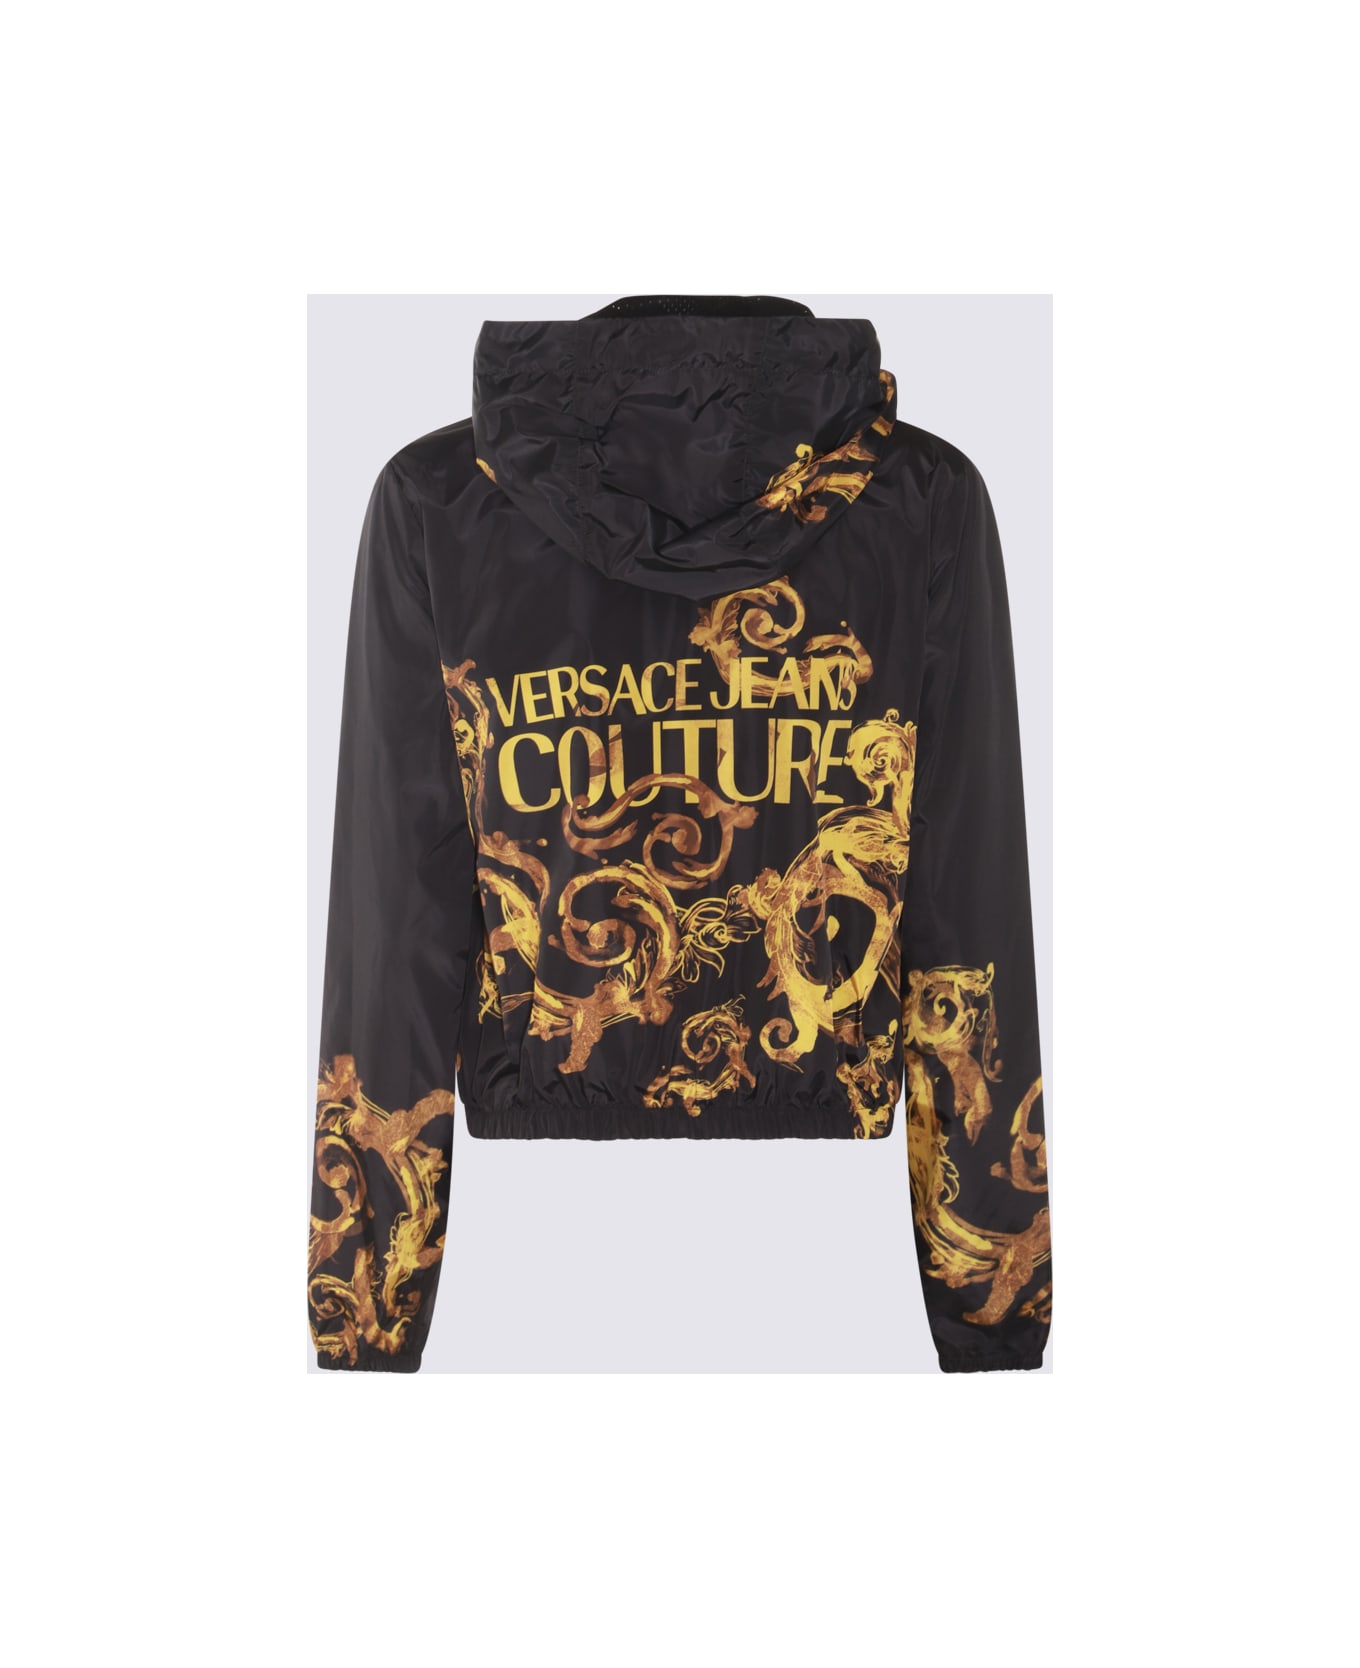 Versace Jeans Couture Black And Gold Casual Jacket - Black